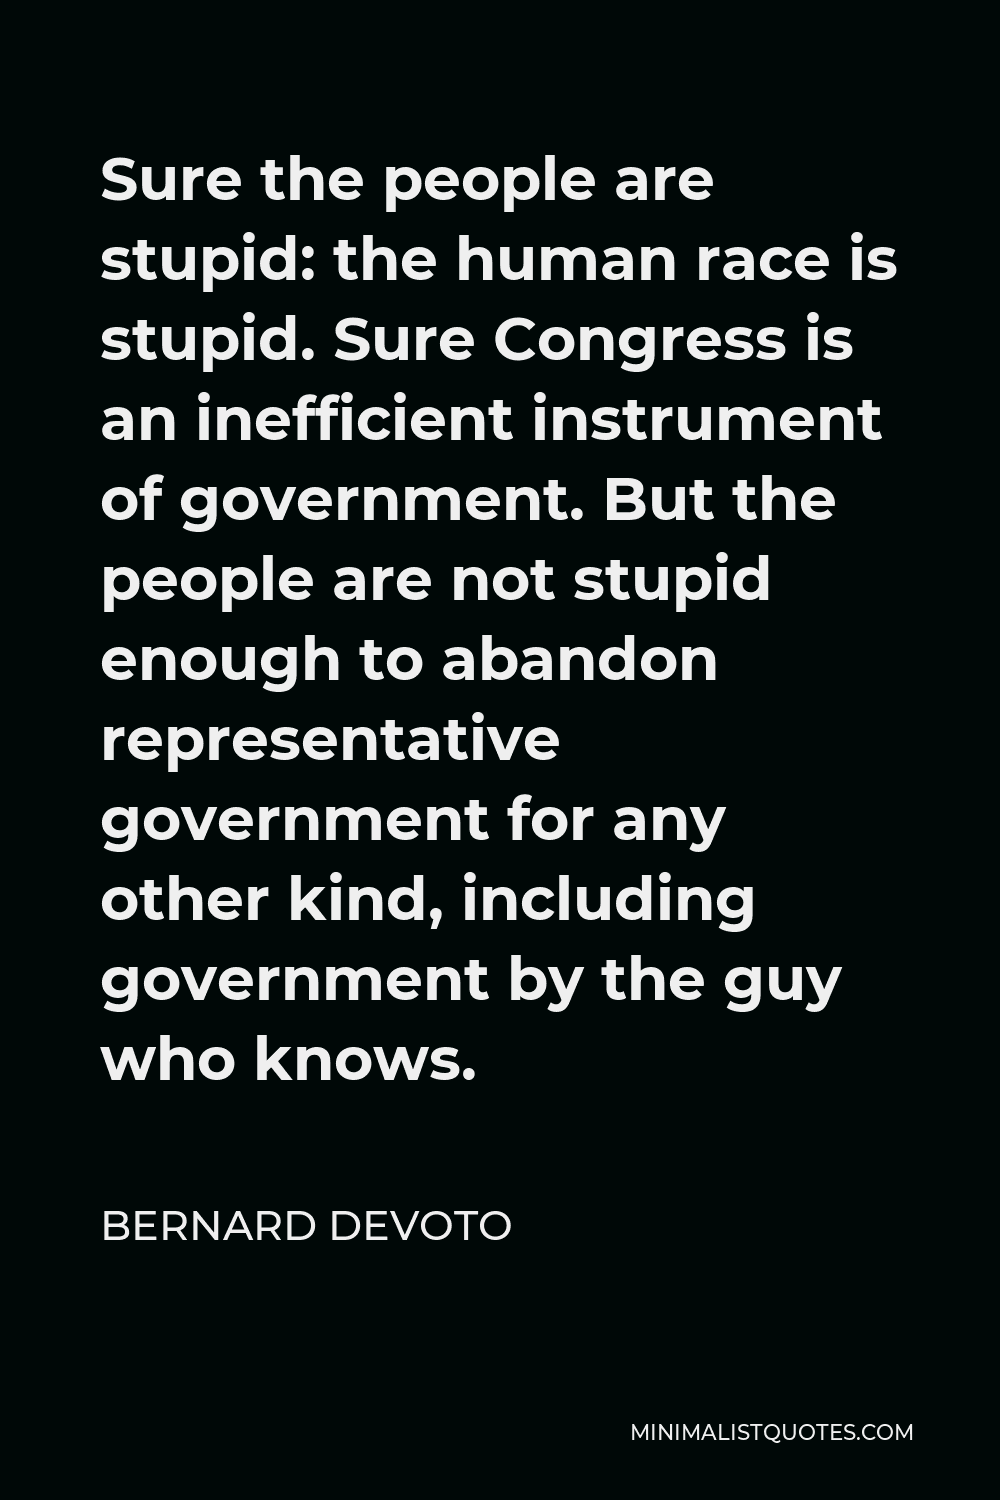 Bernard DeVoto Quote - Sure the people are stupid: the human race is stupid. Sure Congress is an inefficient instrument of government. But the people are not stupid enough to abandon representative government for any other kind, including government by the guy who knows.